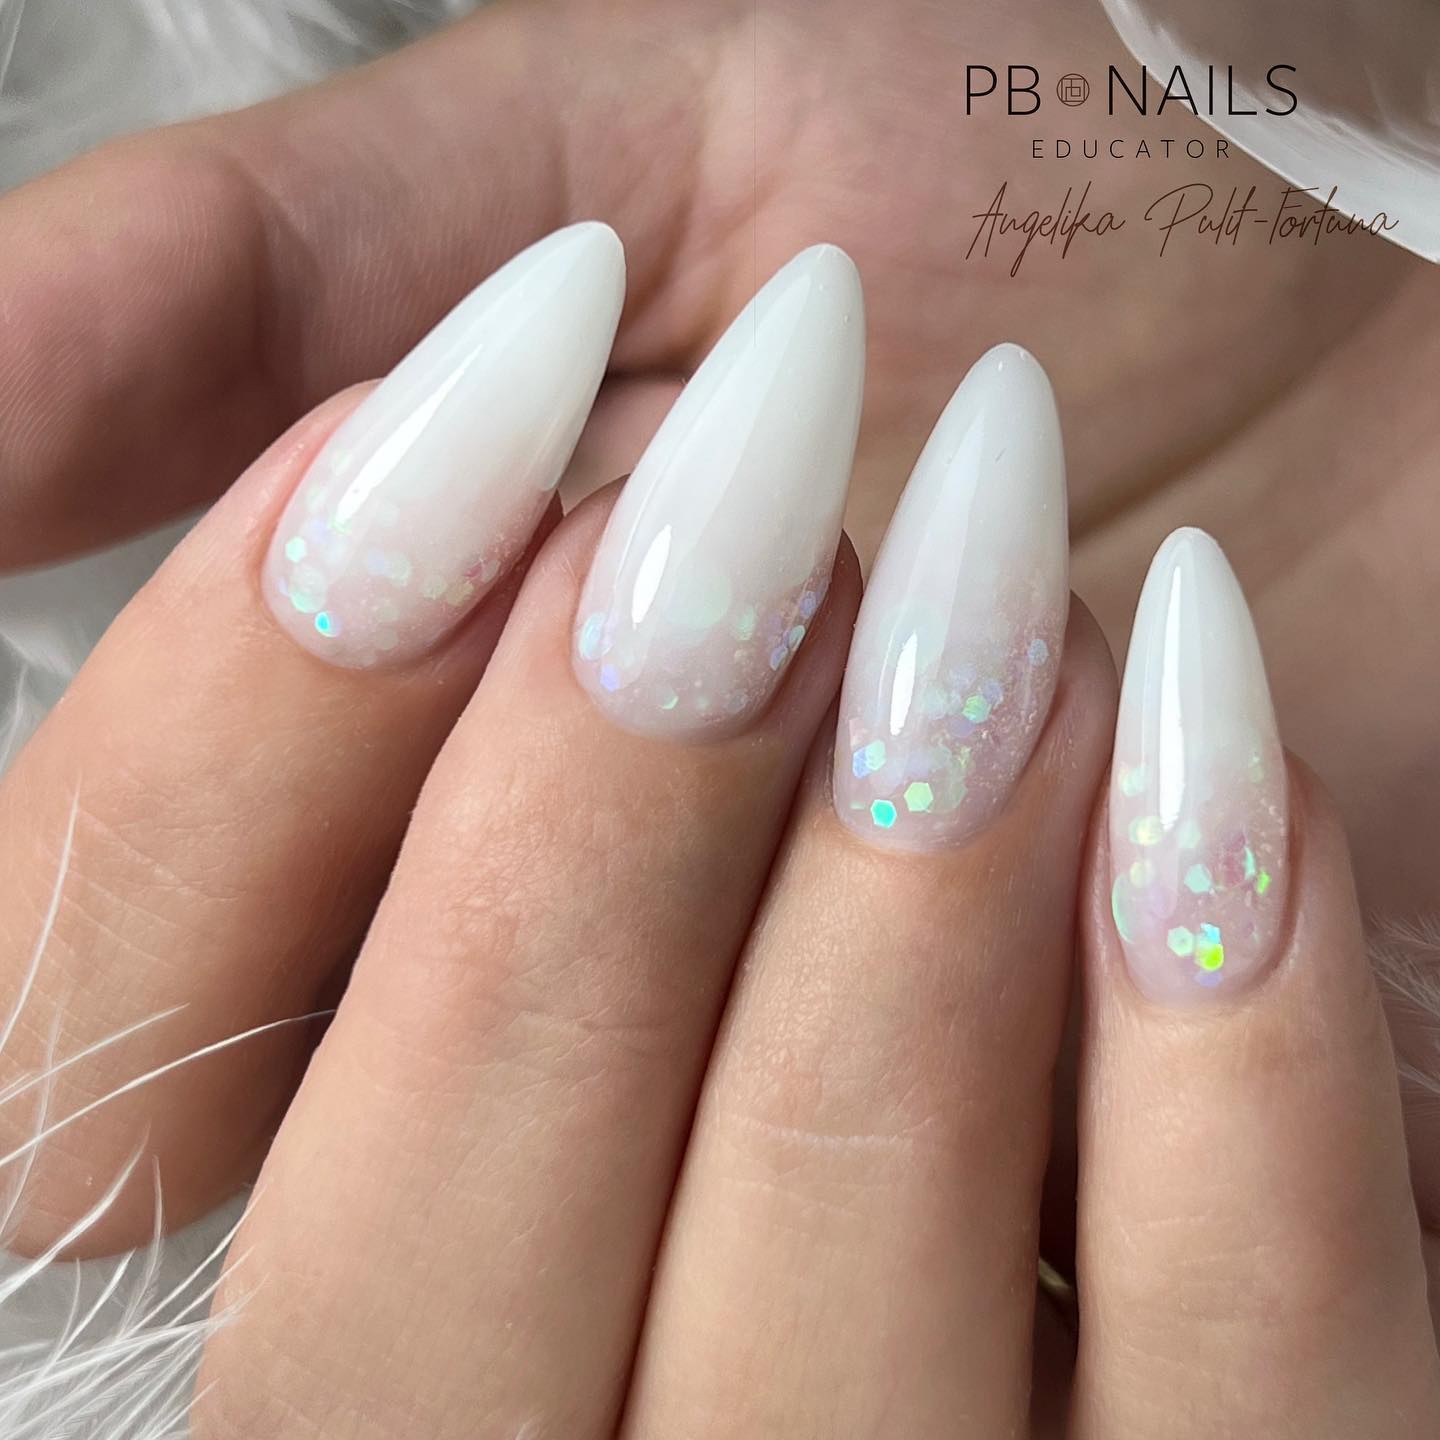 Long almond nails such as these nails will work the best for younger women or brides to be. Fancy a pop of shine and color to your white base?